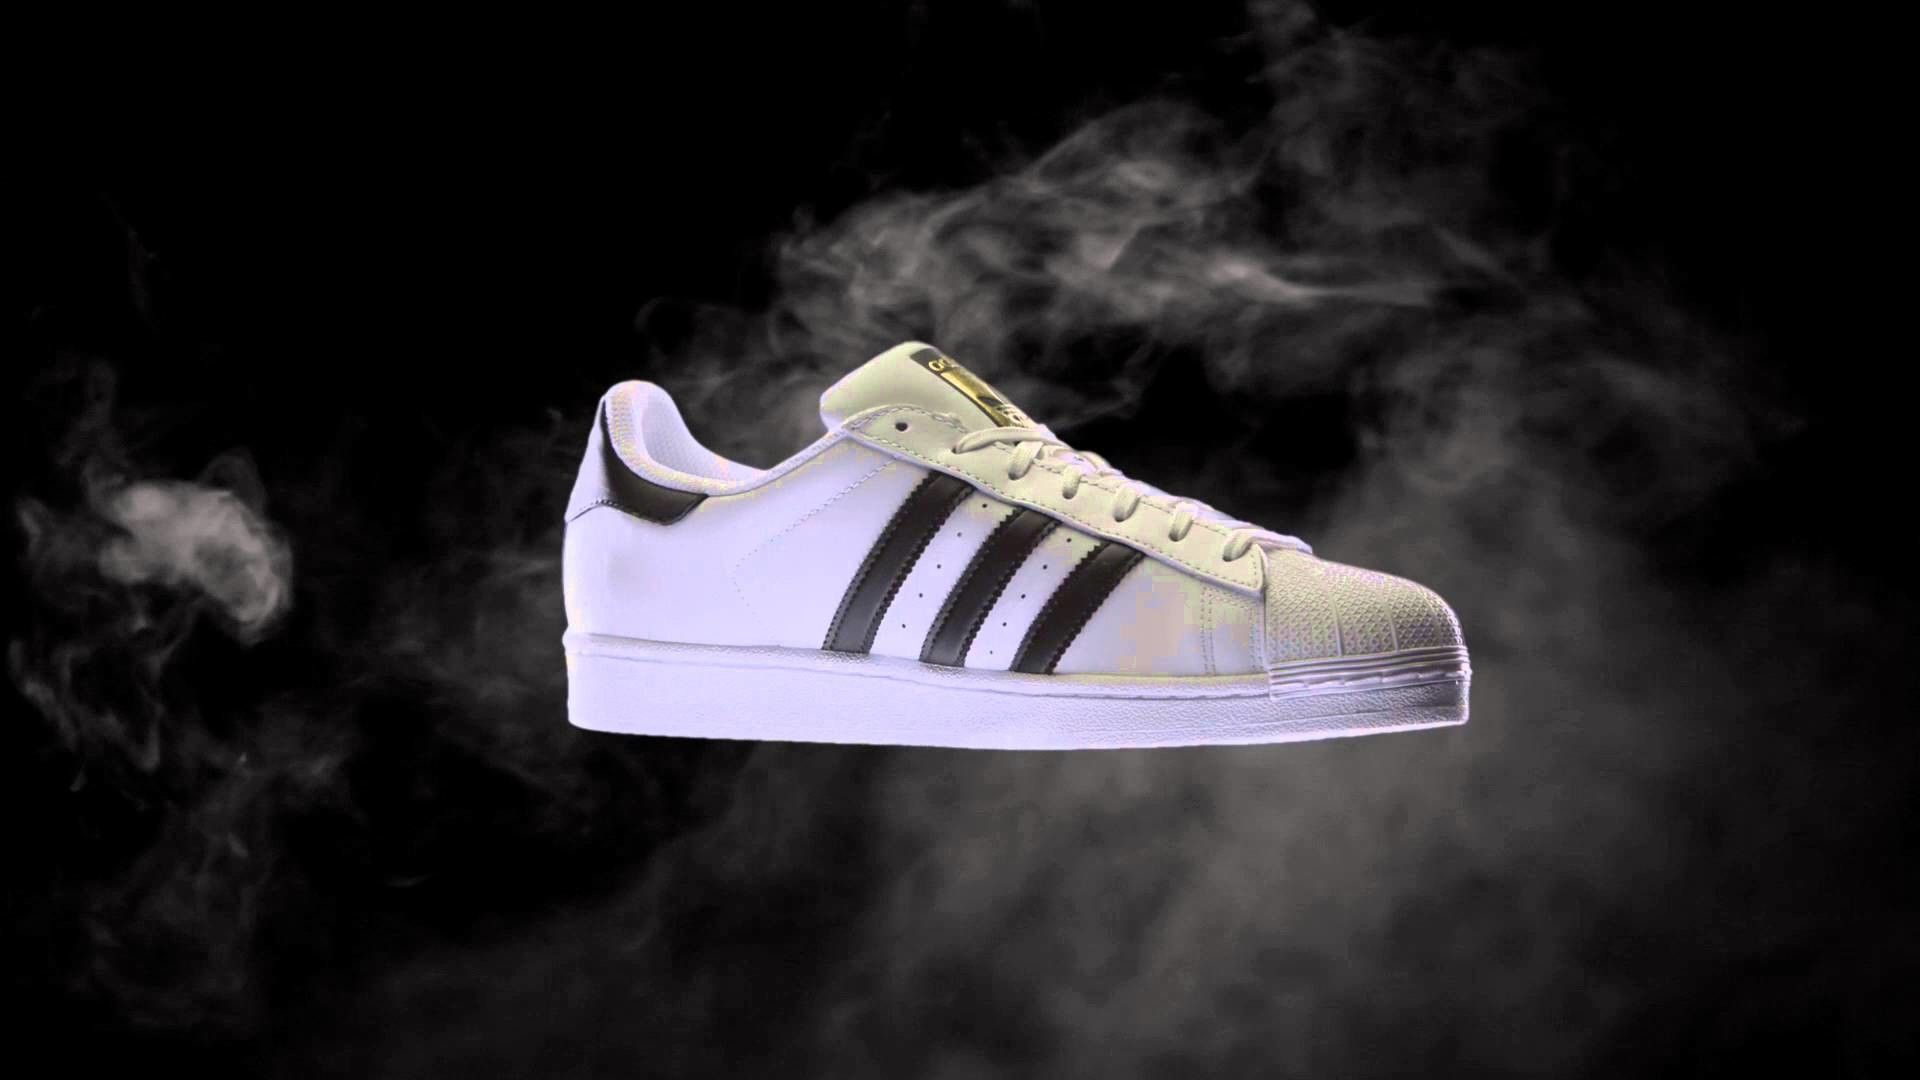 Adidas Shoe Wallpapers - Wallpaper Cave